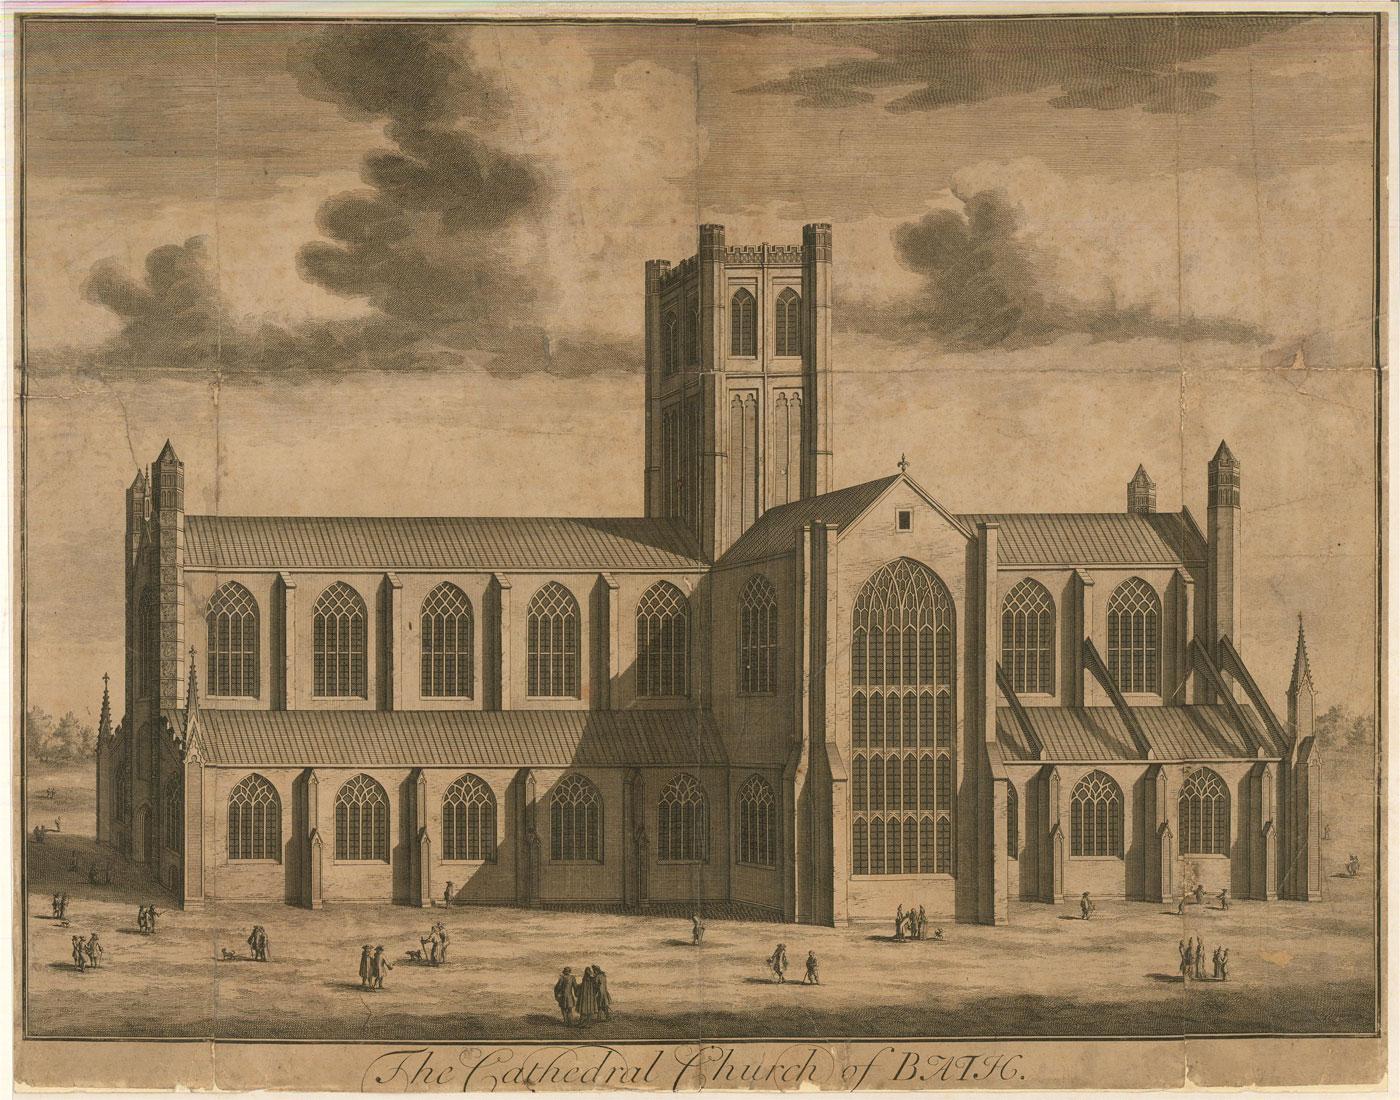 A fine 18th-century view of Bath Abbey, engraved by Johannes 'Jan' Kip (c.1652-1722) for one of the most important English topographical publications of the 18th century, 'Britannia Illustrata' (1707-9). Inscribed with the title in plate to the